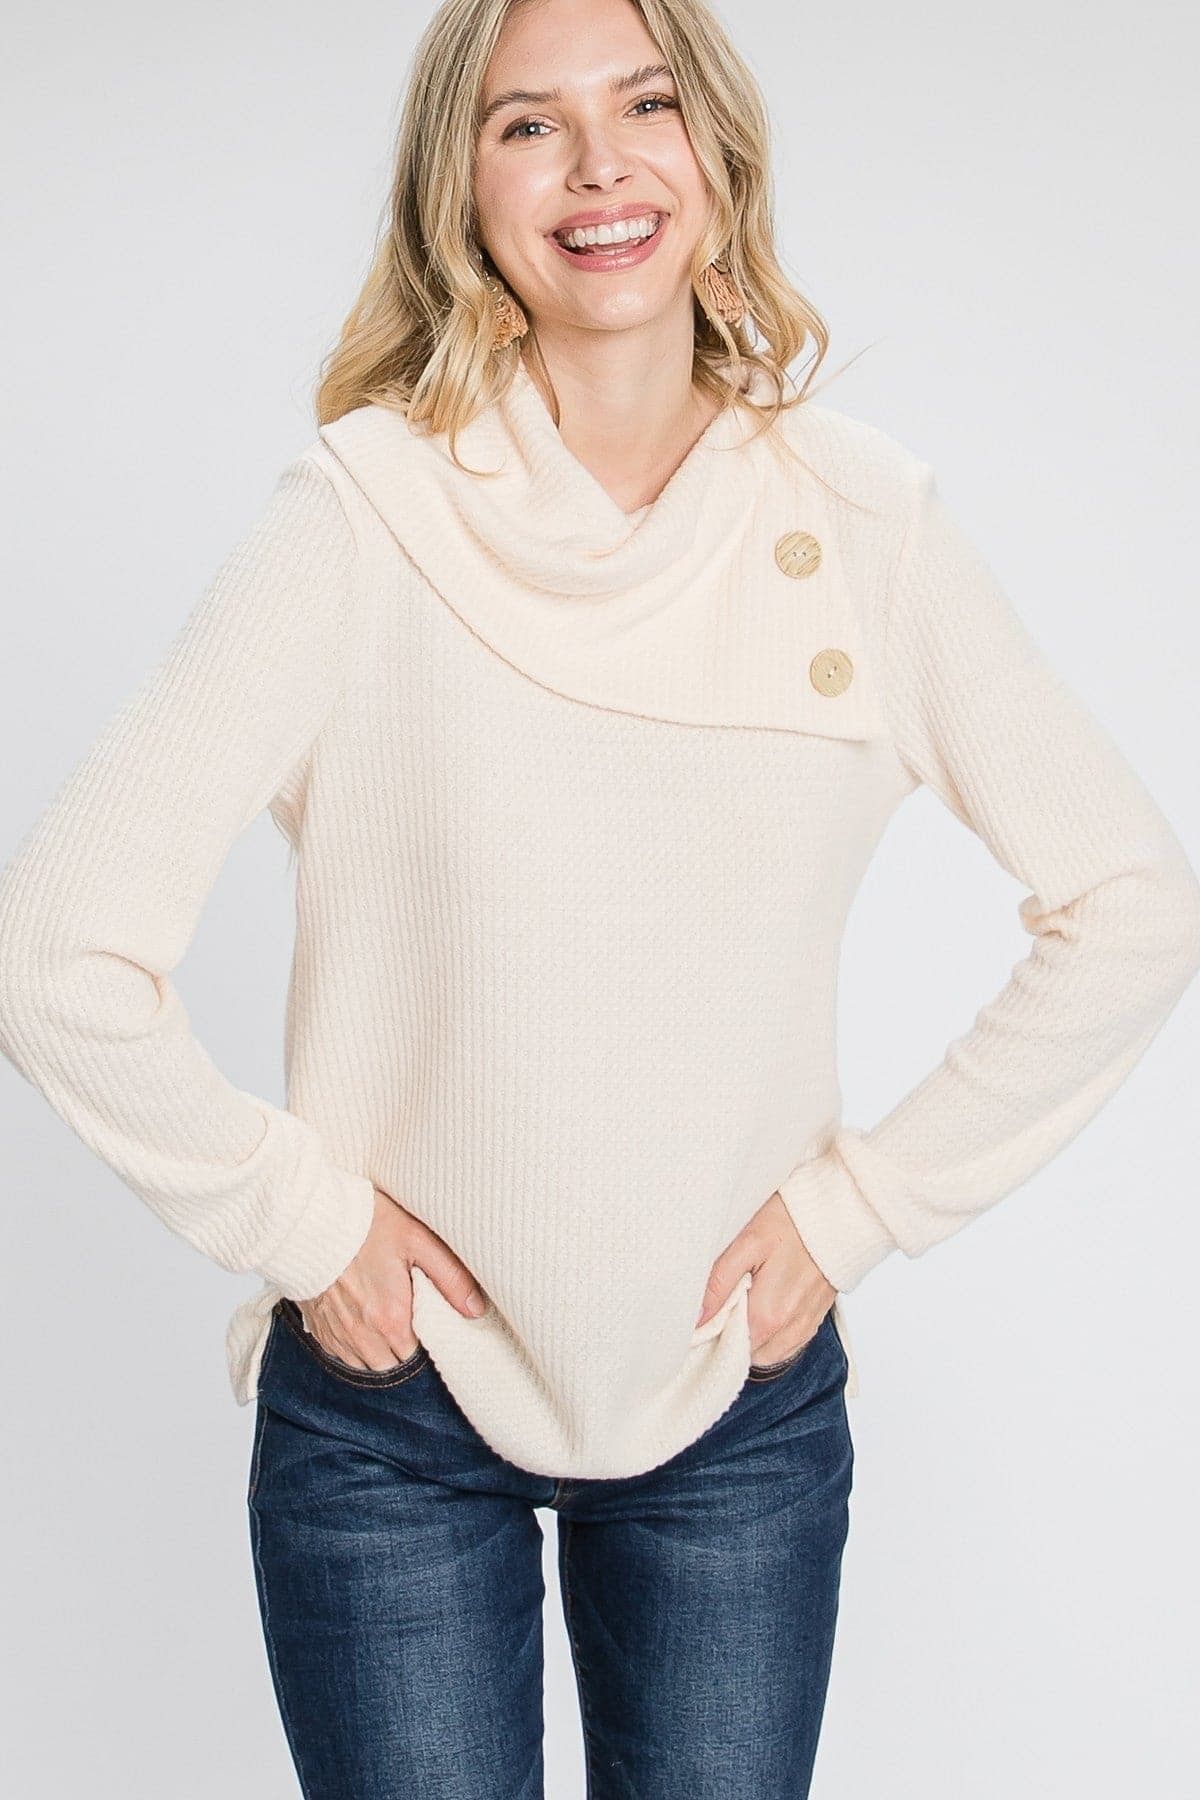 Off White Long Sleeve Rib Knitted Sweater - Shopping Therapy, LLC Cardigan